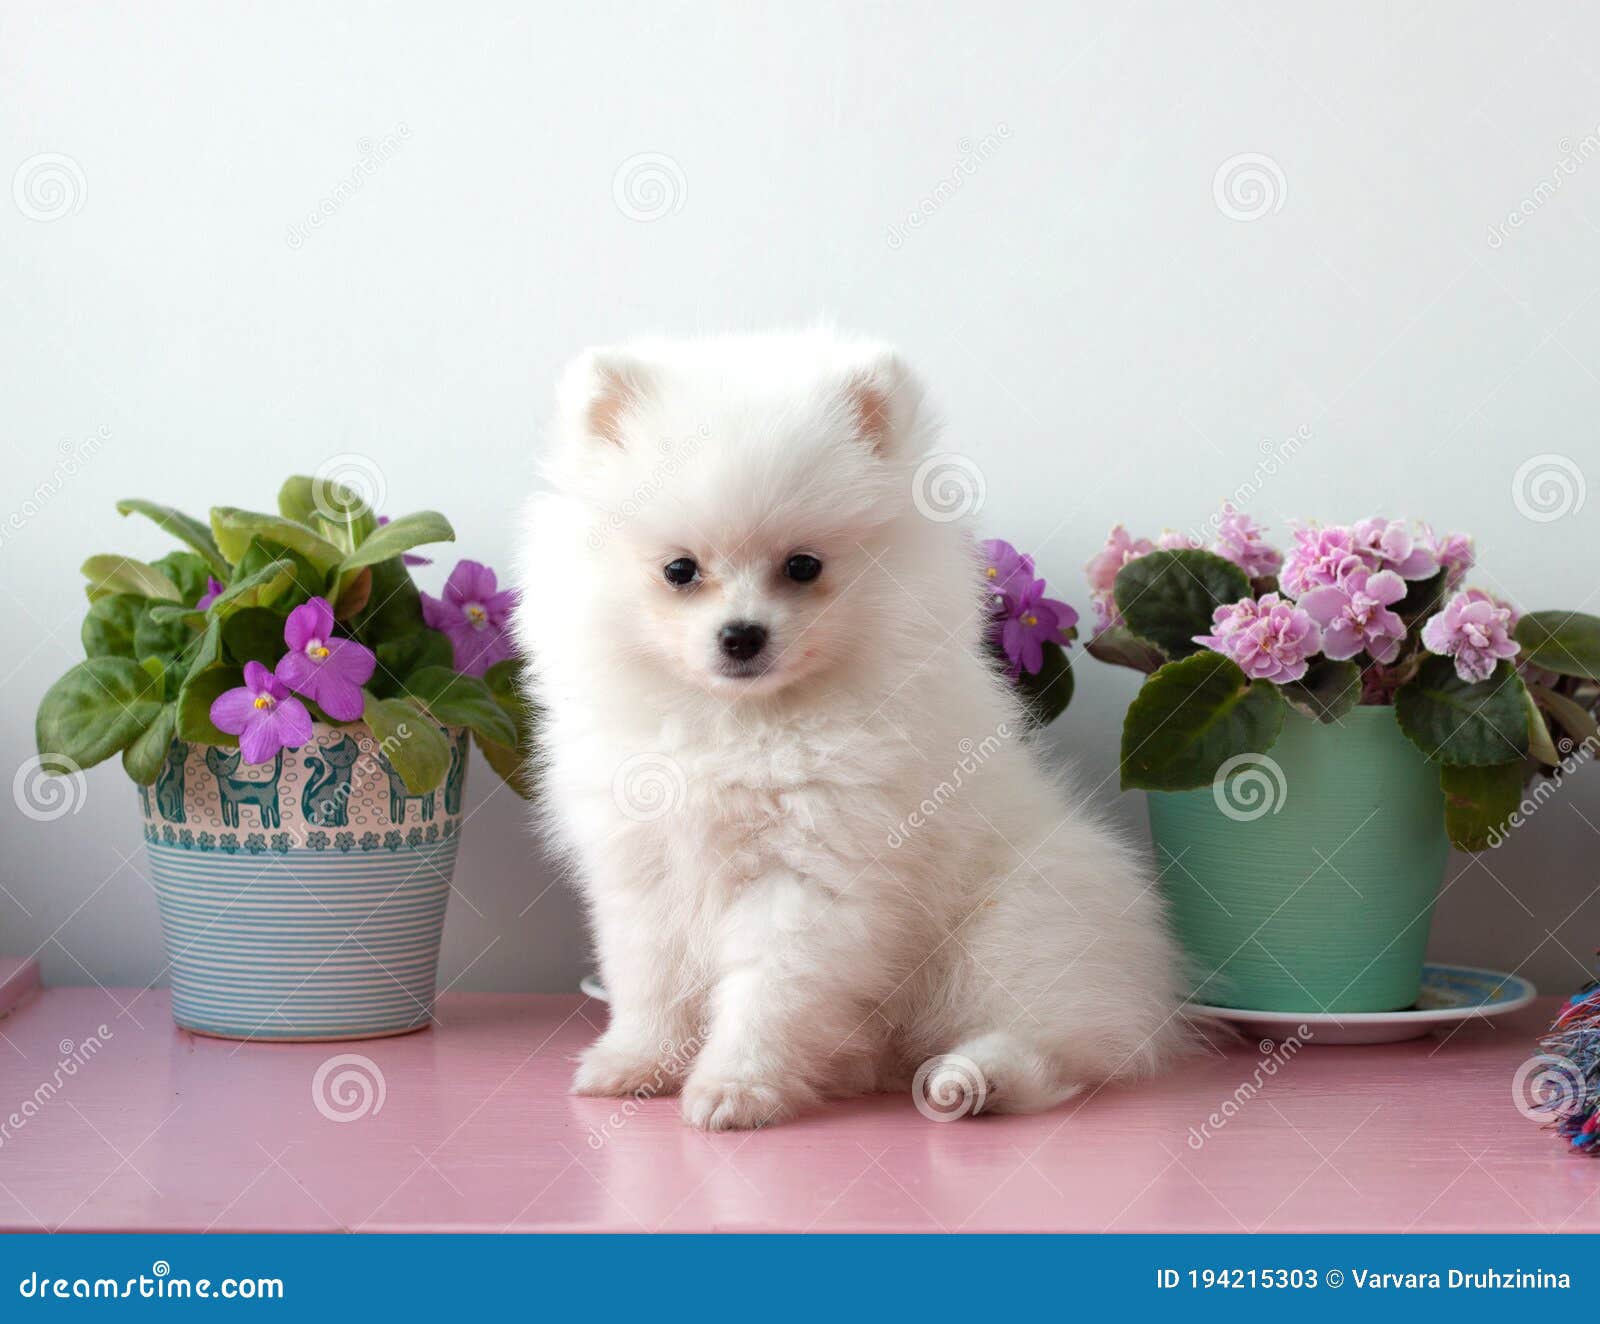 4 968 Old Pomeranian Photos Free Royalty Free Stock Photos From Dreamstime